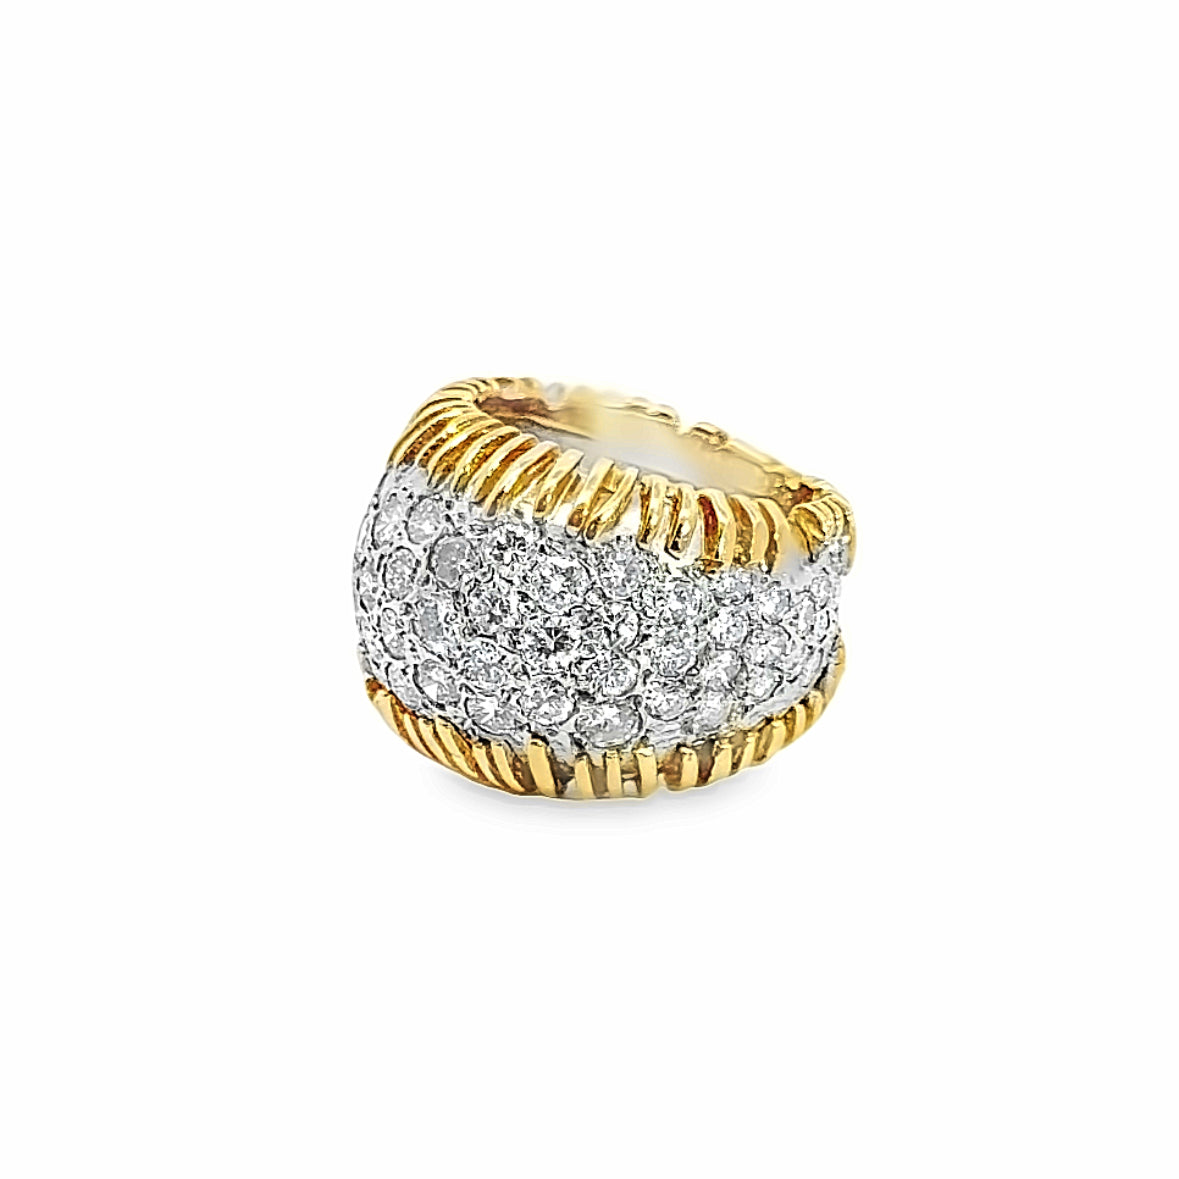 18K Yellow Gold Stitch Detail & Pave-Set Sparkly Wide Diamond Band Ring